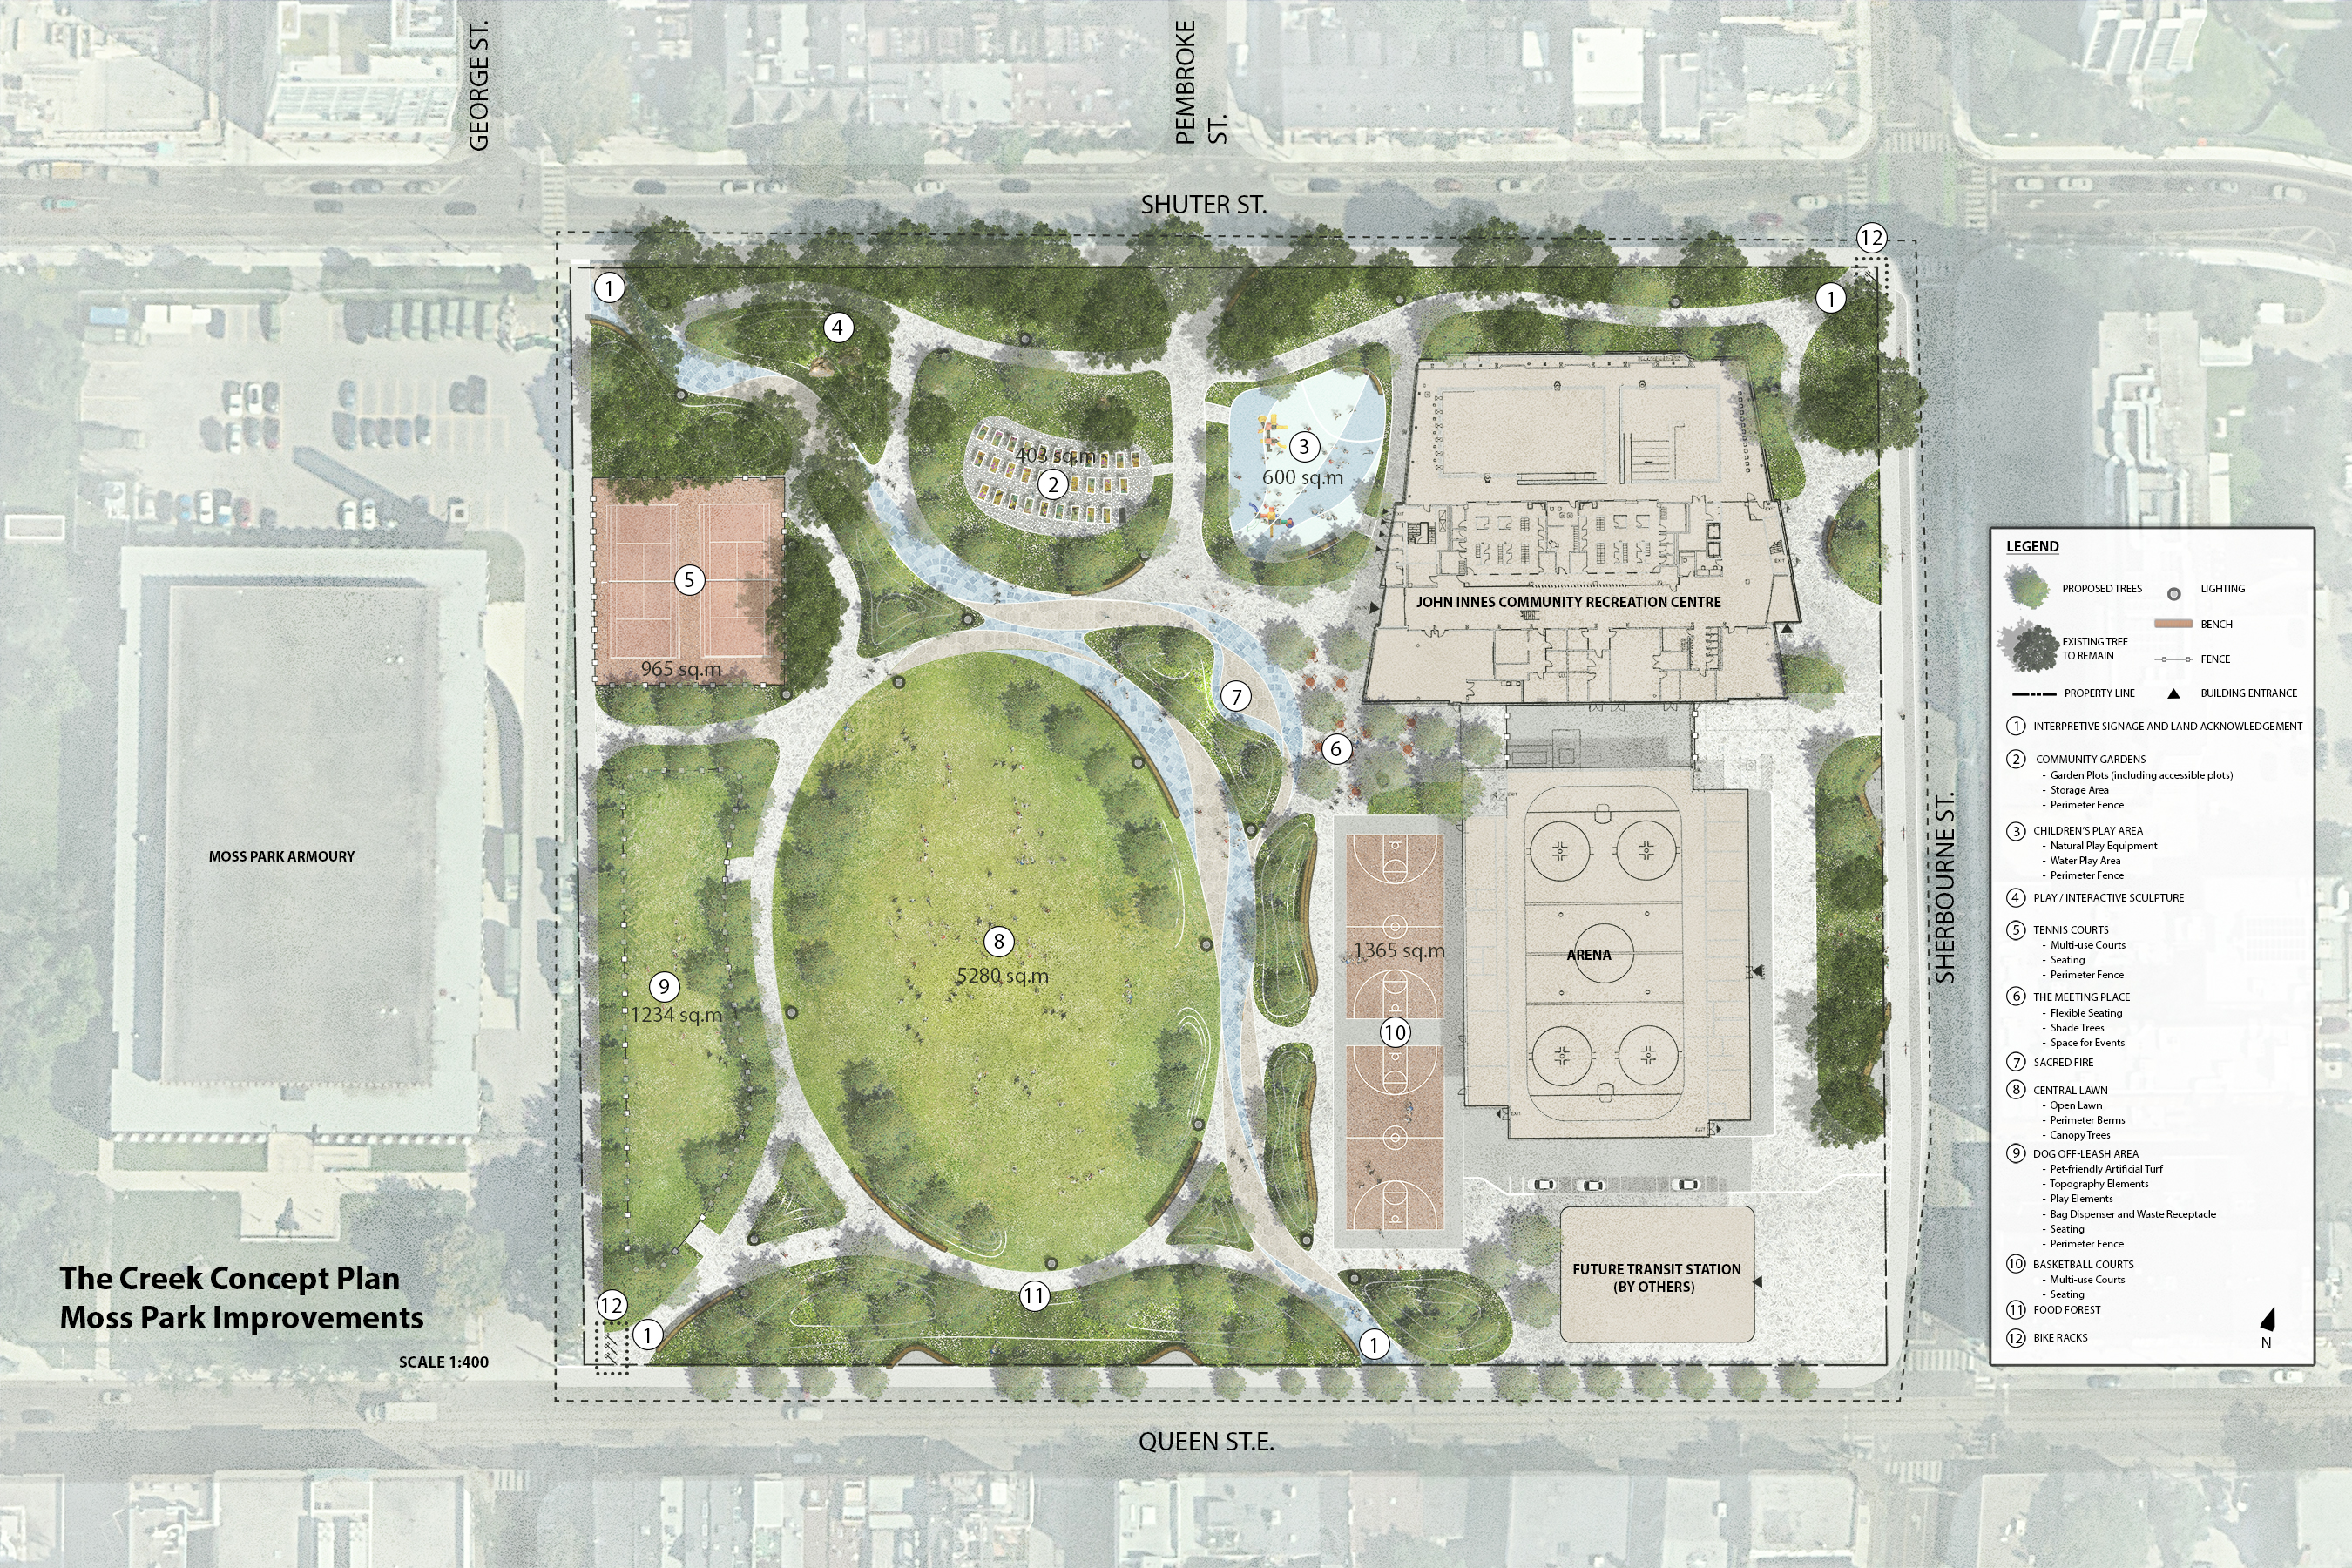 Preferred concept plan for Moss Park. A main path extends from the north-west corner diagonally to the south. Entry points are located at each of the site corners, and at Pembroke Street, with interpretive signage, including an Indigenous Land Acknowledgement. In the center is a large open lawn. Along the north edge of the site the existing trees are proposed to remain, with a new walking path weaving below them. The play area is located west of the new CRC building, featuring both a dry and water play area. An open plaza space, with flexible seating and canopy trees, is located west of the CRC programming space. A large community garden space is located centrally, while tennis courts are proposed to remain in their current location at the west. East of the arena are two basketball courts with seating, and on the other side of the central lawn is located an off-leash area. 